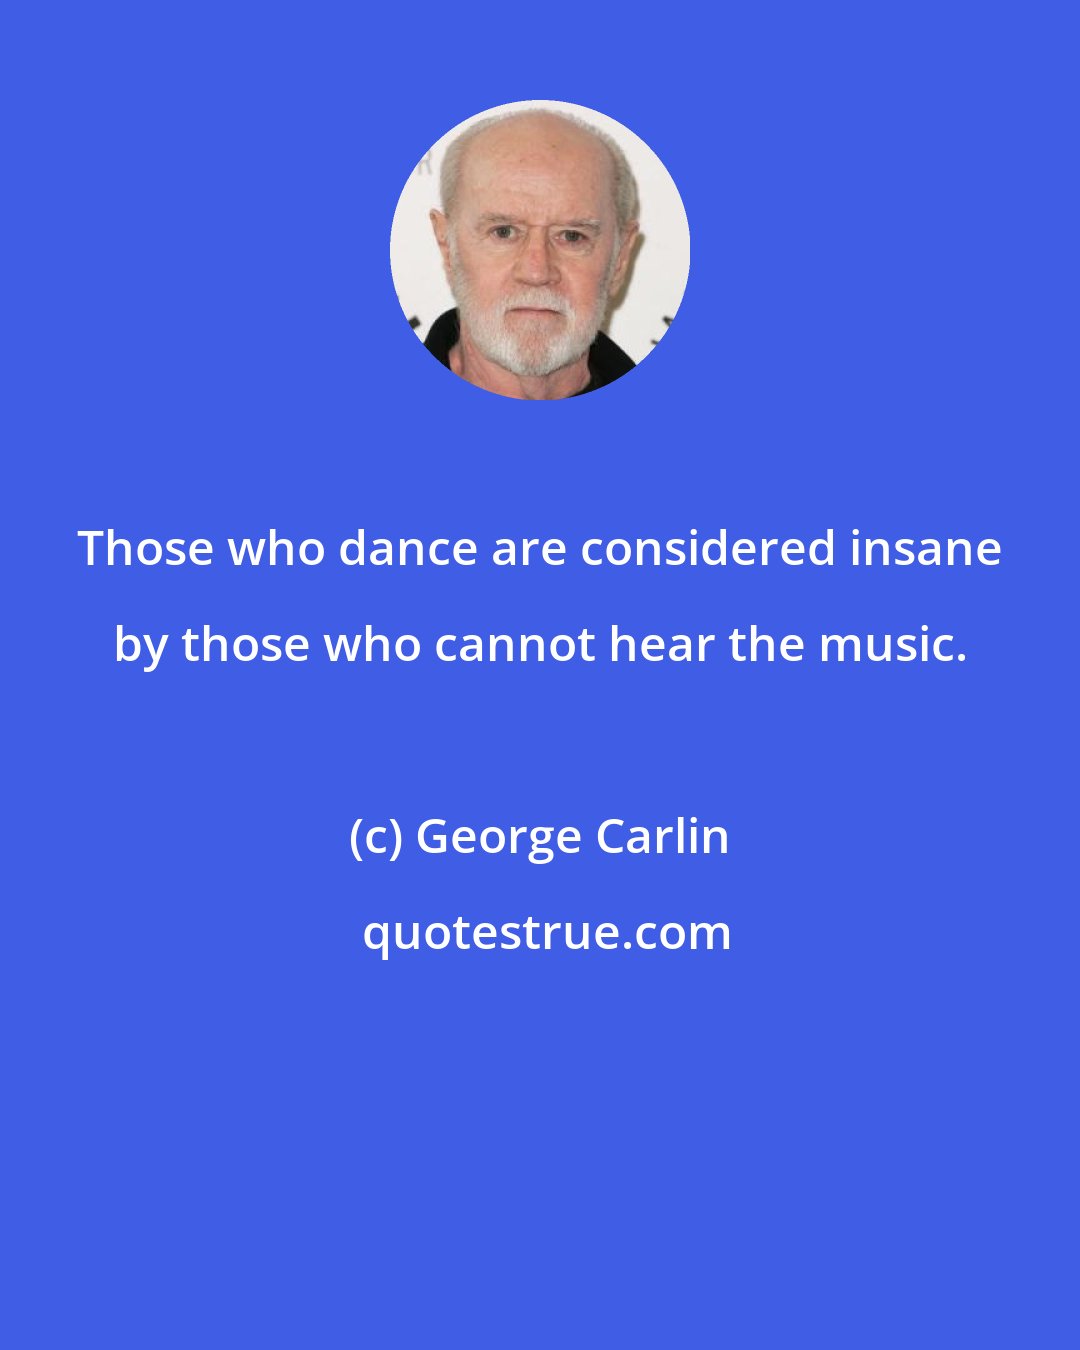 George Carlin: Those who dance are considered insane by those who cannot hear the music.